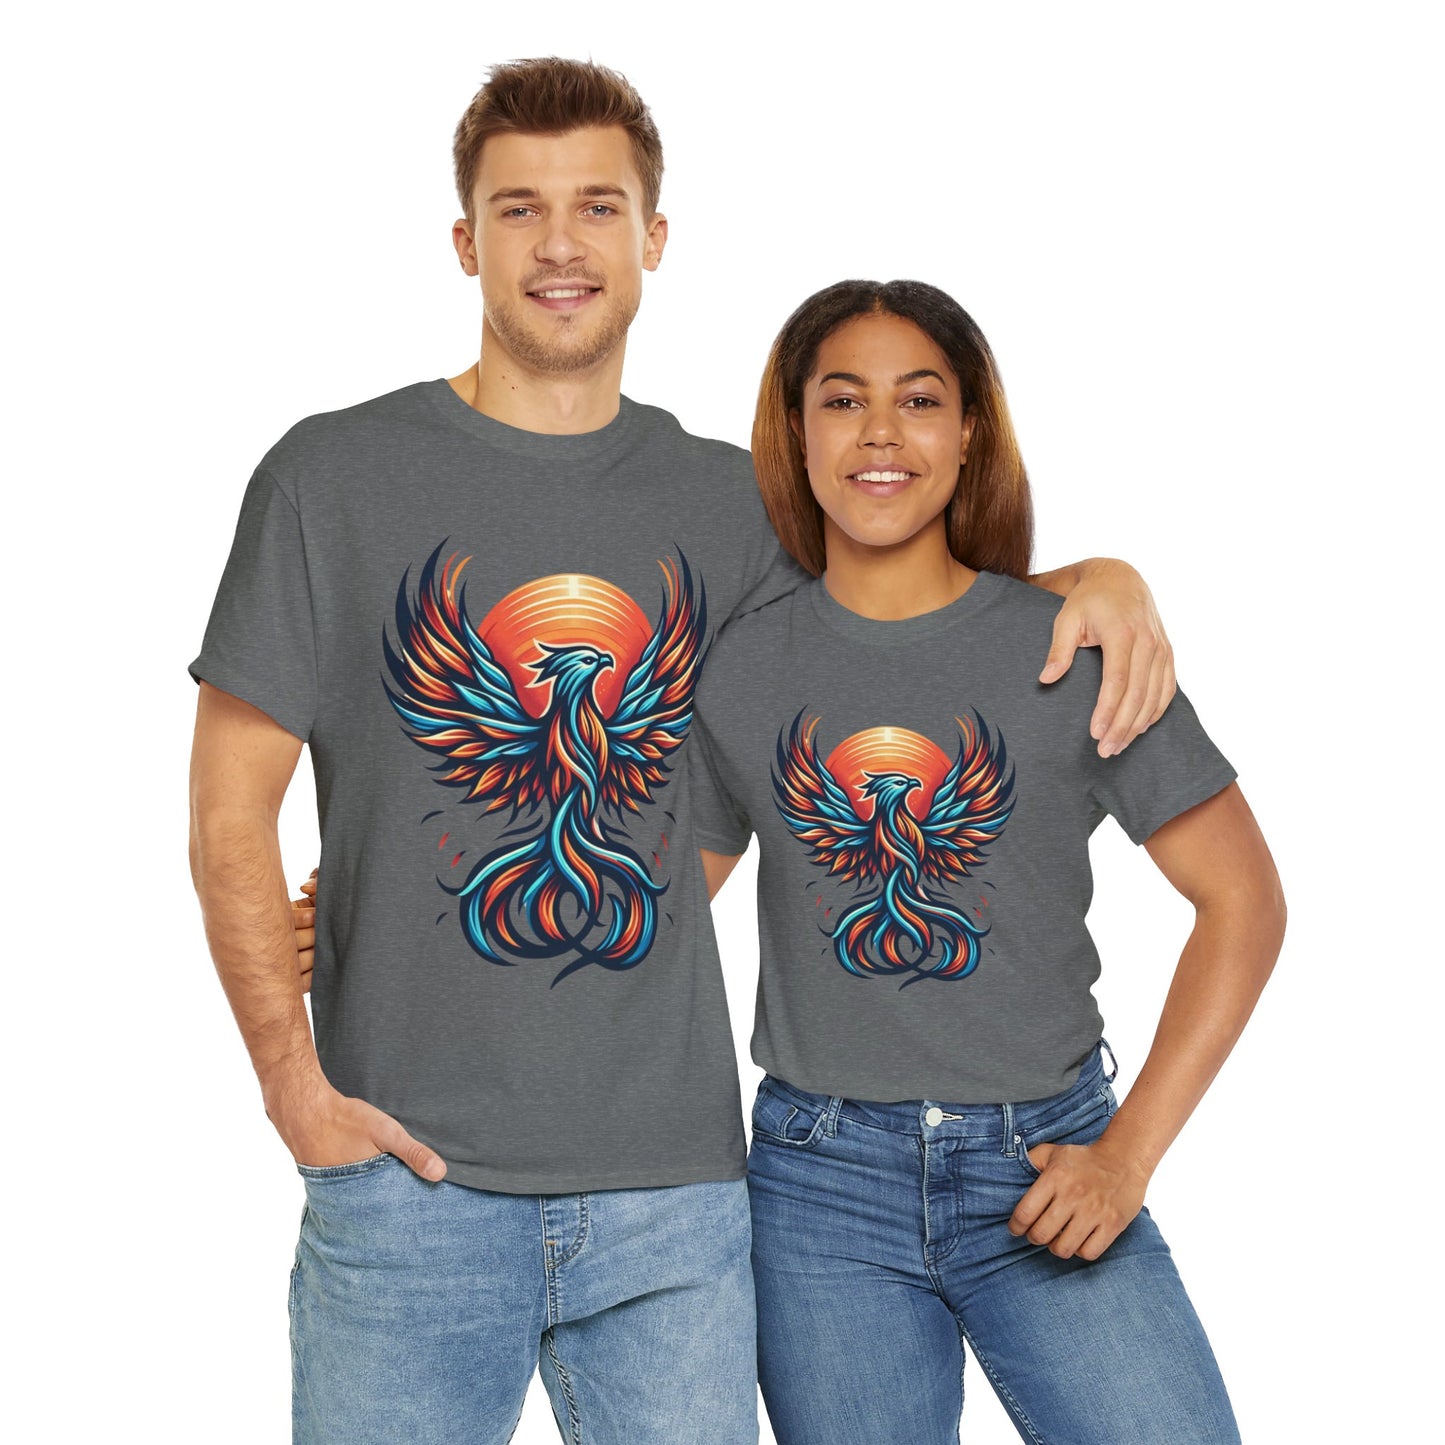 Phoenix Rising Again - T-Shirt - Resilience | Are you celebrating a rebirth? The Phoenix is the symbol of overcoming obstacles and change in life.